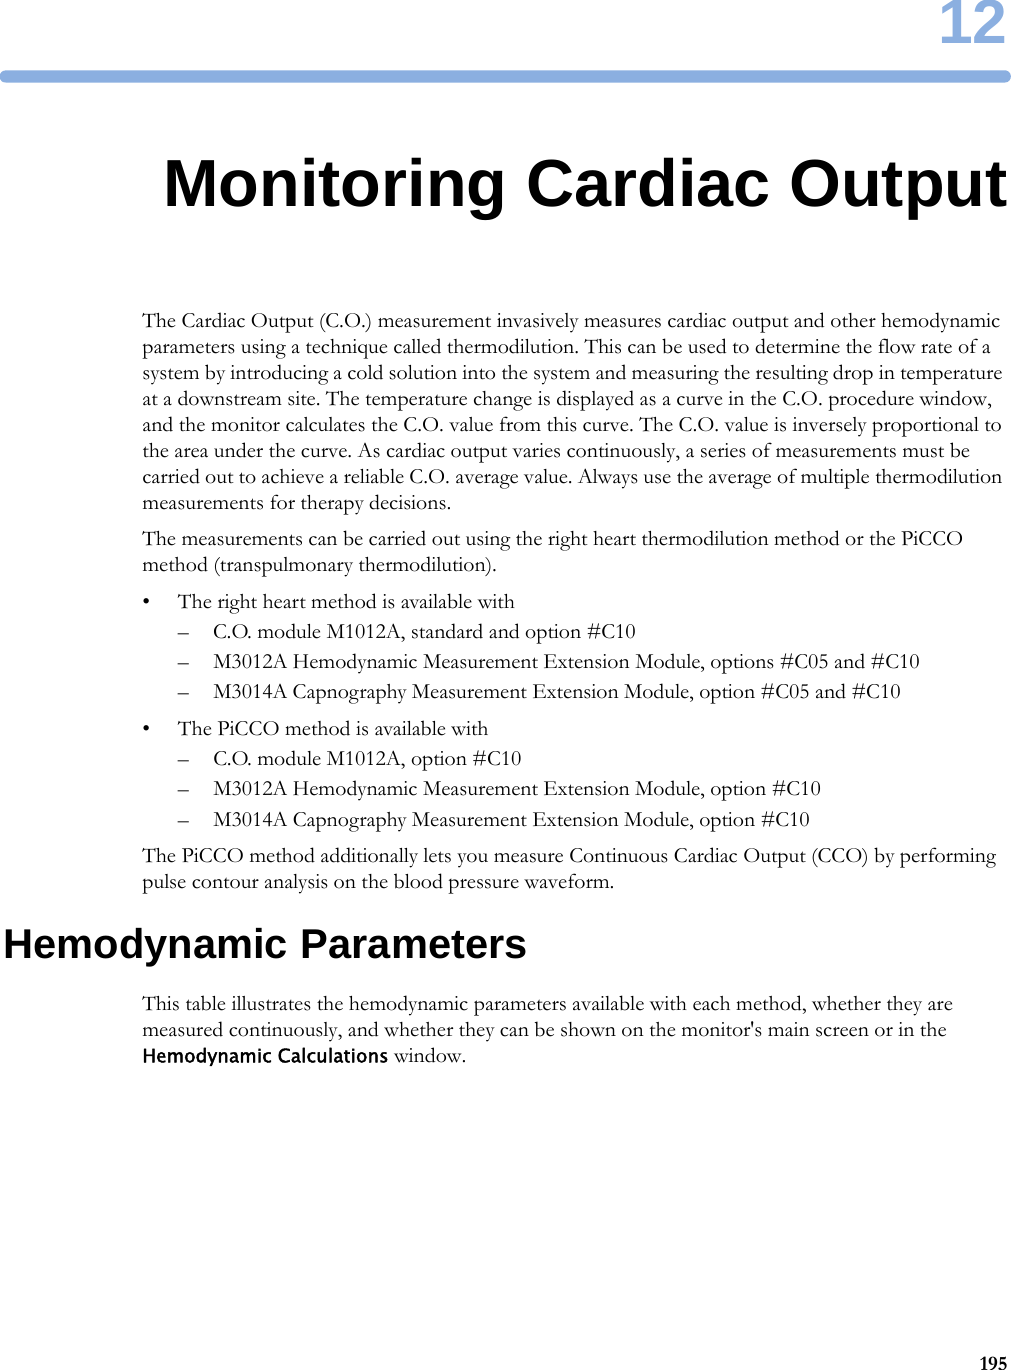 1219512Monitoring Cardiac OutputThe Cardiac Output (C.O.) measurement invasively measures cardiac output and other hemodynamic parameters using a technique called thermodilution. This can be used to determine the flow rate of a system by introducing a cold solution into the system and measuring the resulting drop in temperature at a downstream site. The temperature change is displayed as a curve in the C.O. procedure window, and the monitor calculates the C.O. value from this curve. The C.O. value is inversely proportional to the area under the curve. As cardiac output varies continuously, a series of measurements must be carried out to achieve a reliable C.O. average value. Always use the average of multiple thermodilution measurements for therapy decisions.The measurements can be carried out using the right heart thermodilution method or the PiCCO method (transpulmonary thermodilution).• The right heart method is available with– C.O. module M1012A, standard and option #C10– M3012A Hemodynamic Measurement Extension Module, options #C05 and #C10– M3014A Capnography Measurement Extension Module, option #C05 and #C10• The PiCCO method is available with– C.O. module M1012A, option #C10– M3012A Hemodynamic Measurement Extension Module, option #C10– M3014A Capnography Measurement Extension Module, option #C10The PiCCO method additionally lets you measure Continuous Cardiac Output (CCO) by performing pulse contour analysis on the blood pressure waveform.Hemodynamic ParametersThis table illustrates the hemodynamic parameters available with each method, whether they are measured continuously, and whether they can be shown on the monitor&apos;s main screen or in the Hemodynamic Calculations window.